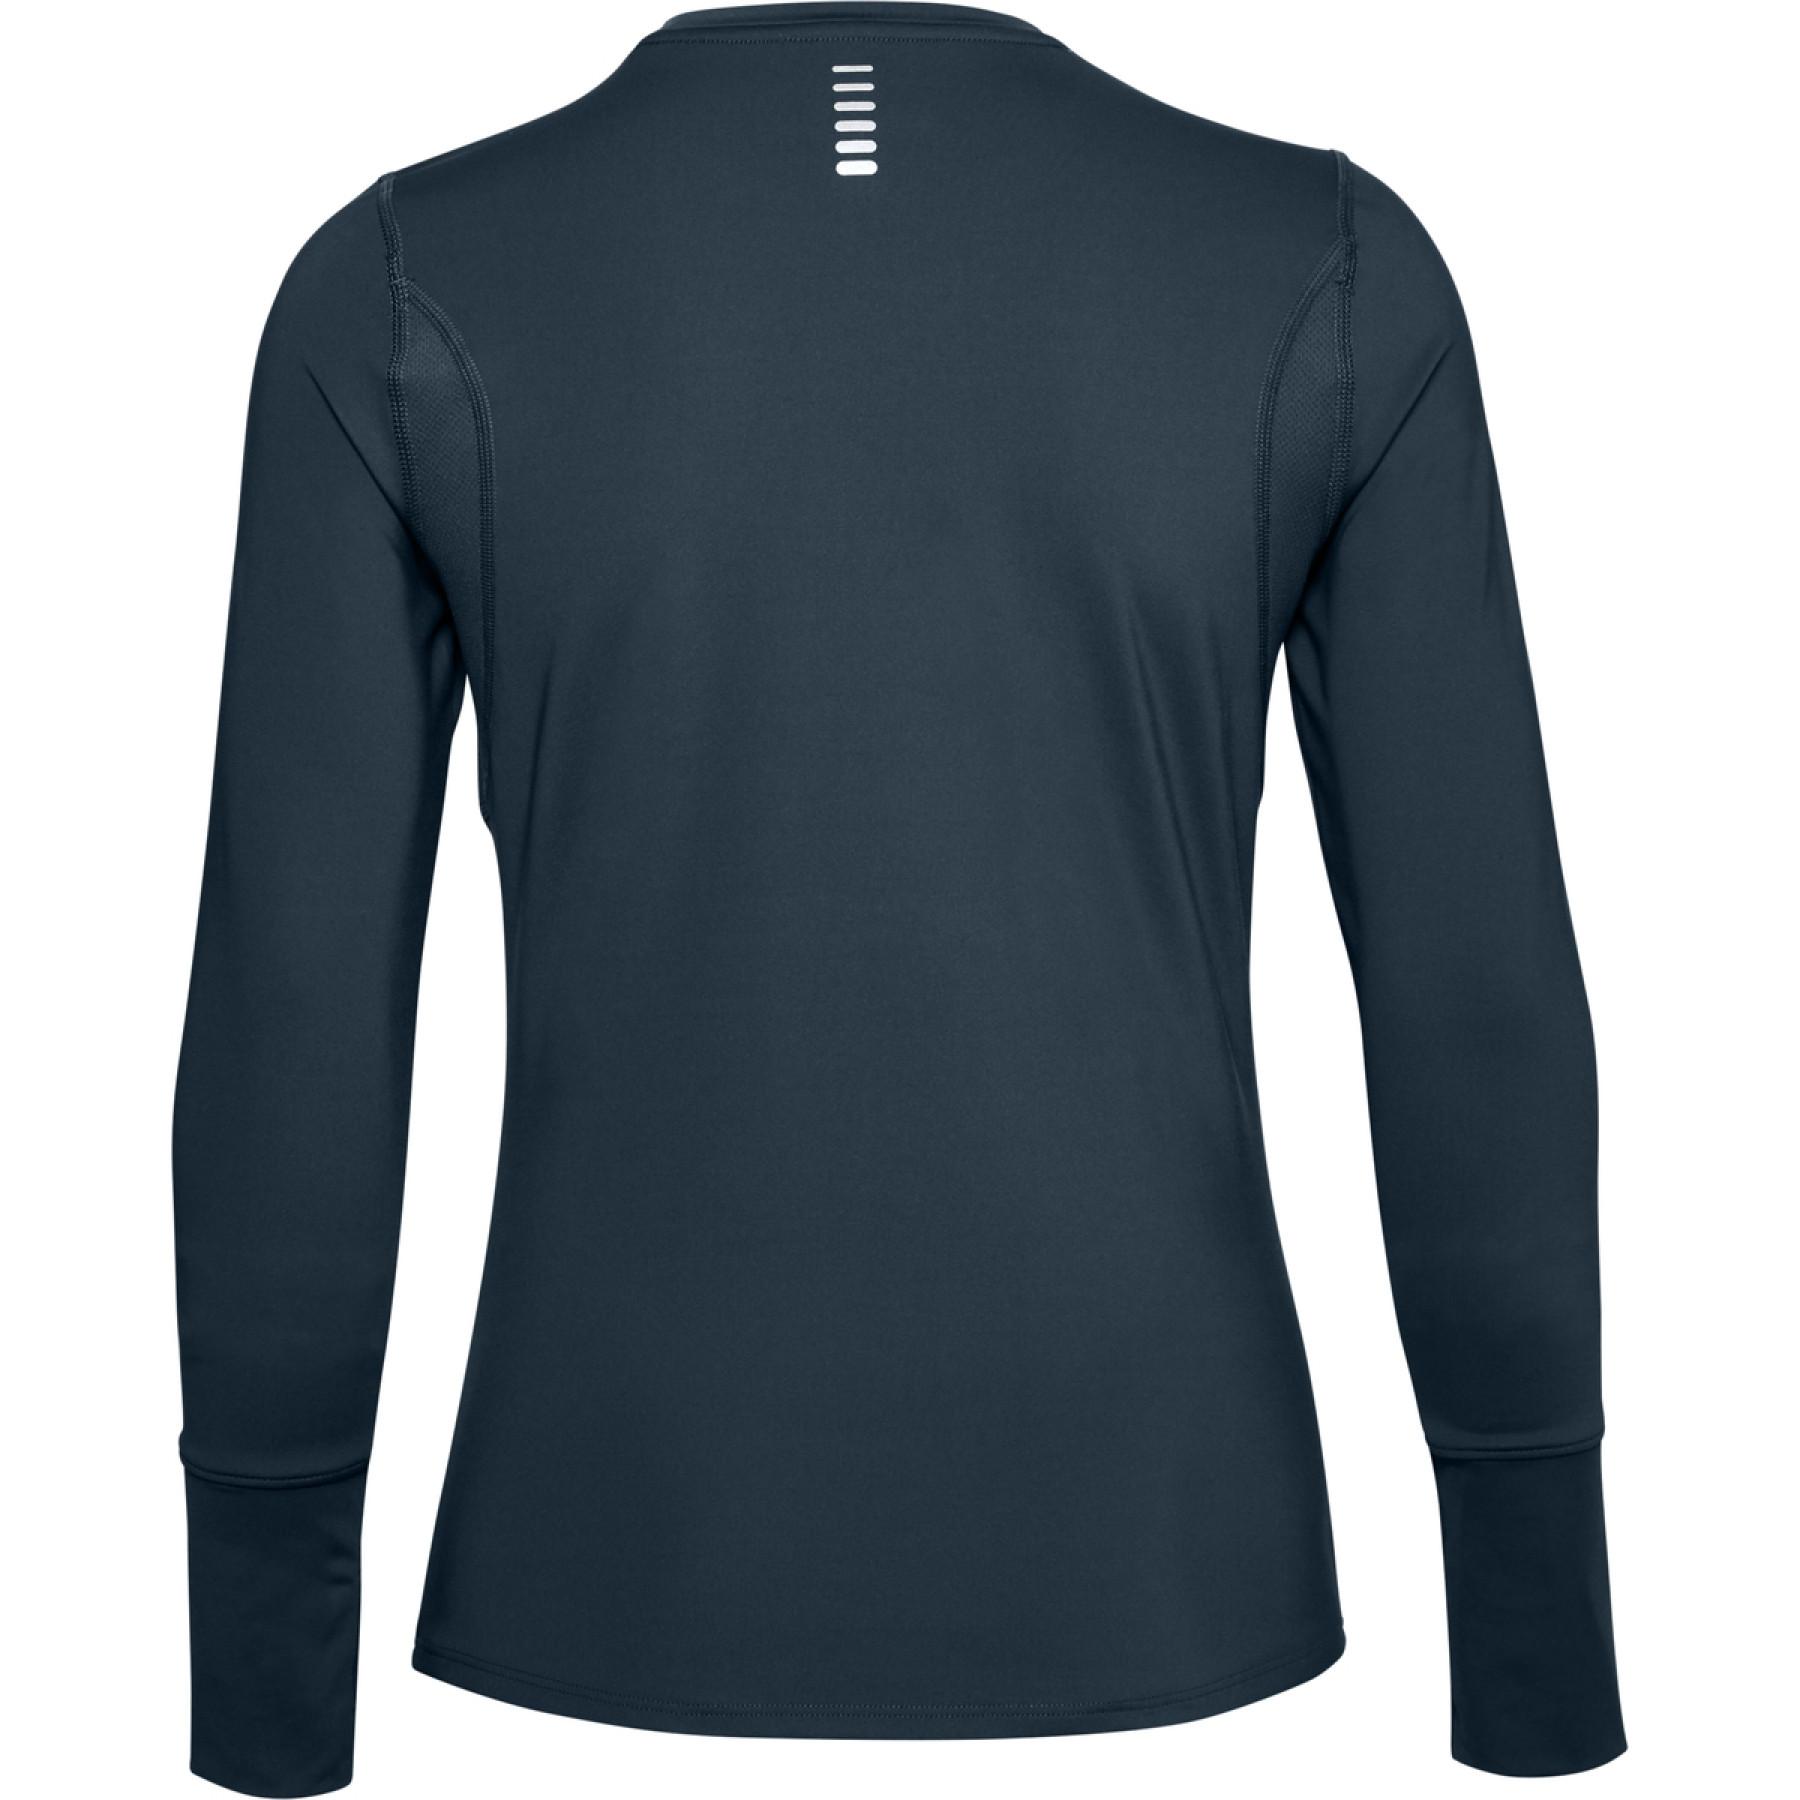 Maillot de mujer Under Armour à manches longues Empowered Crew